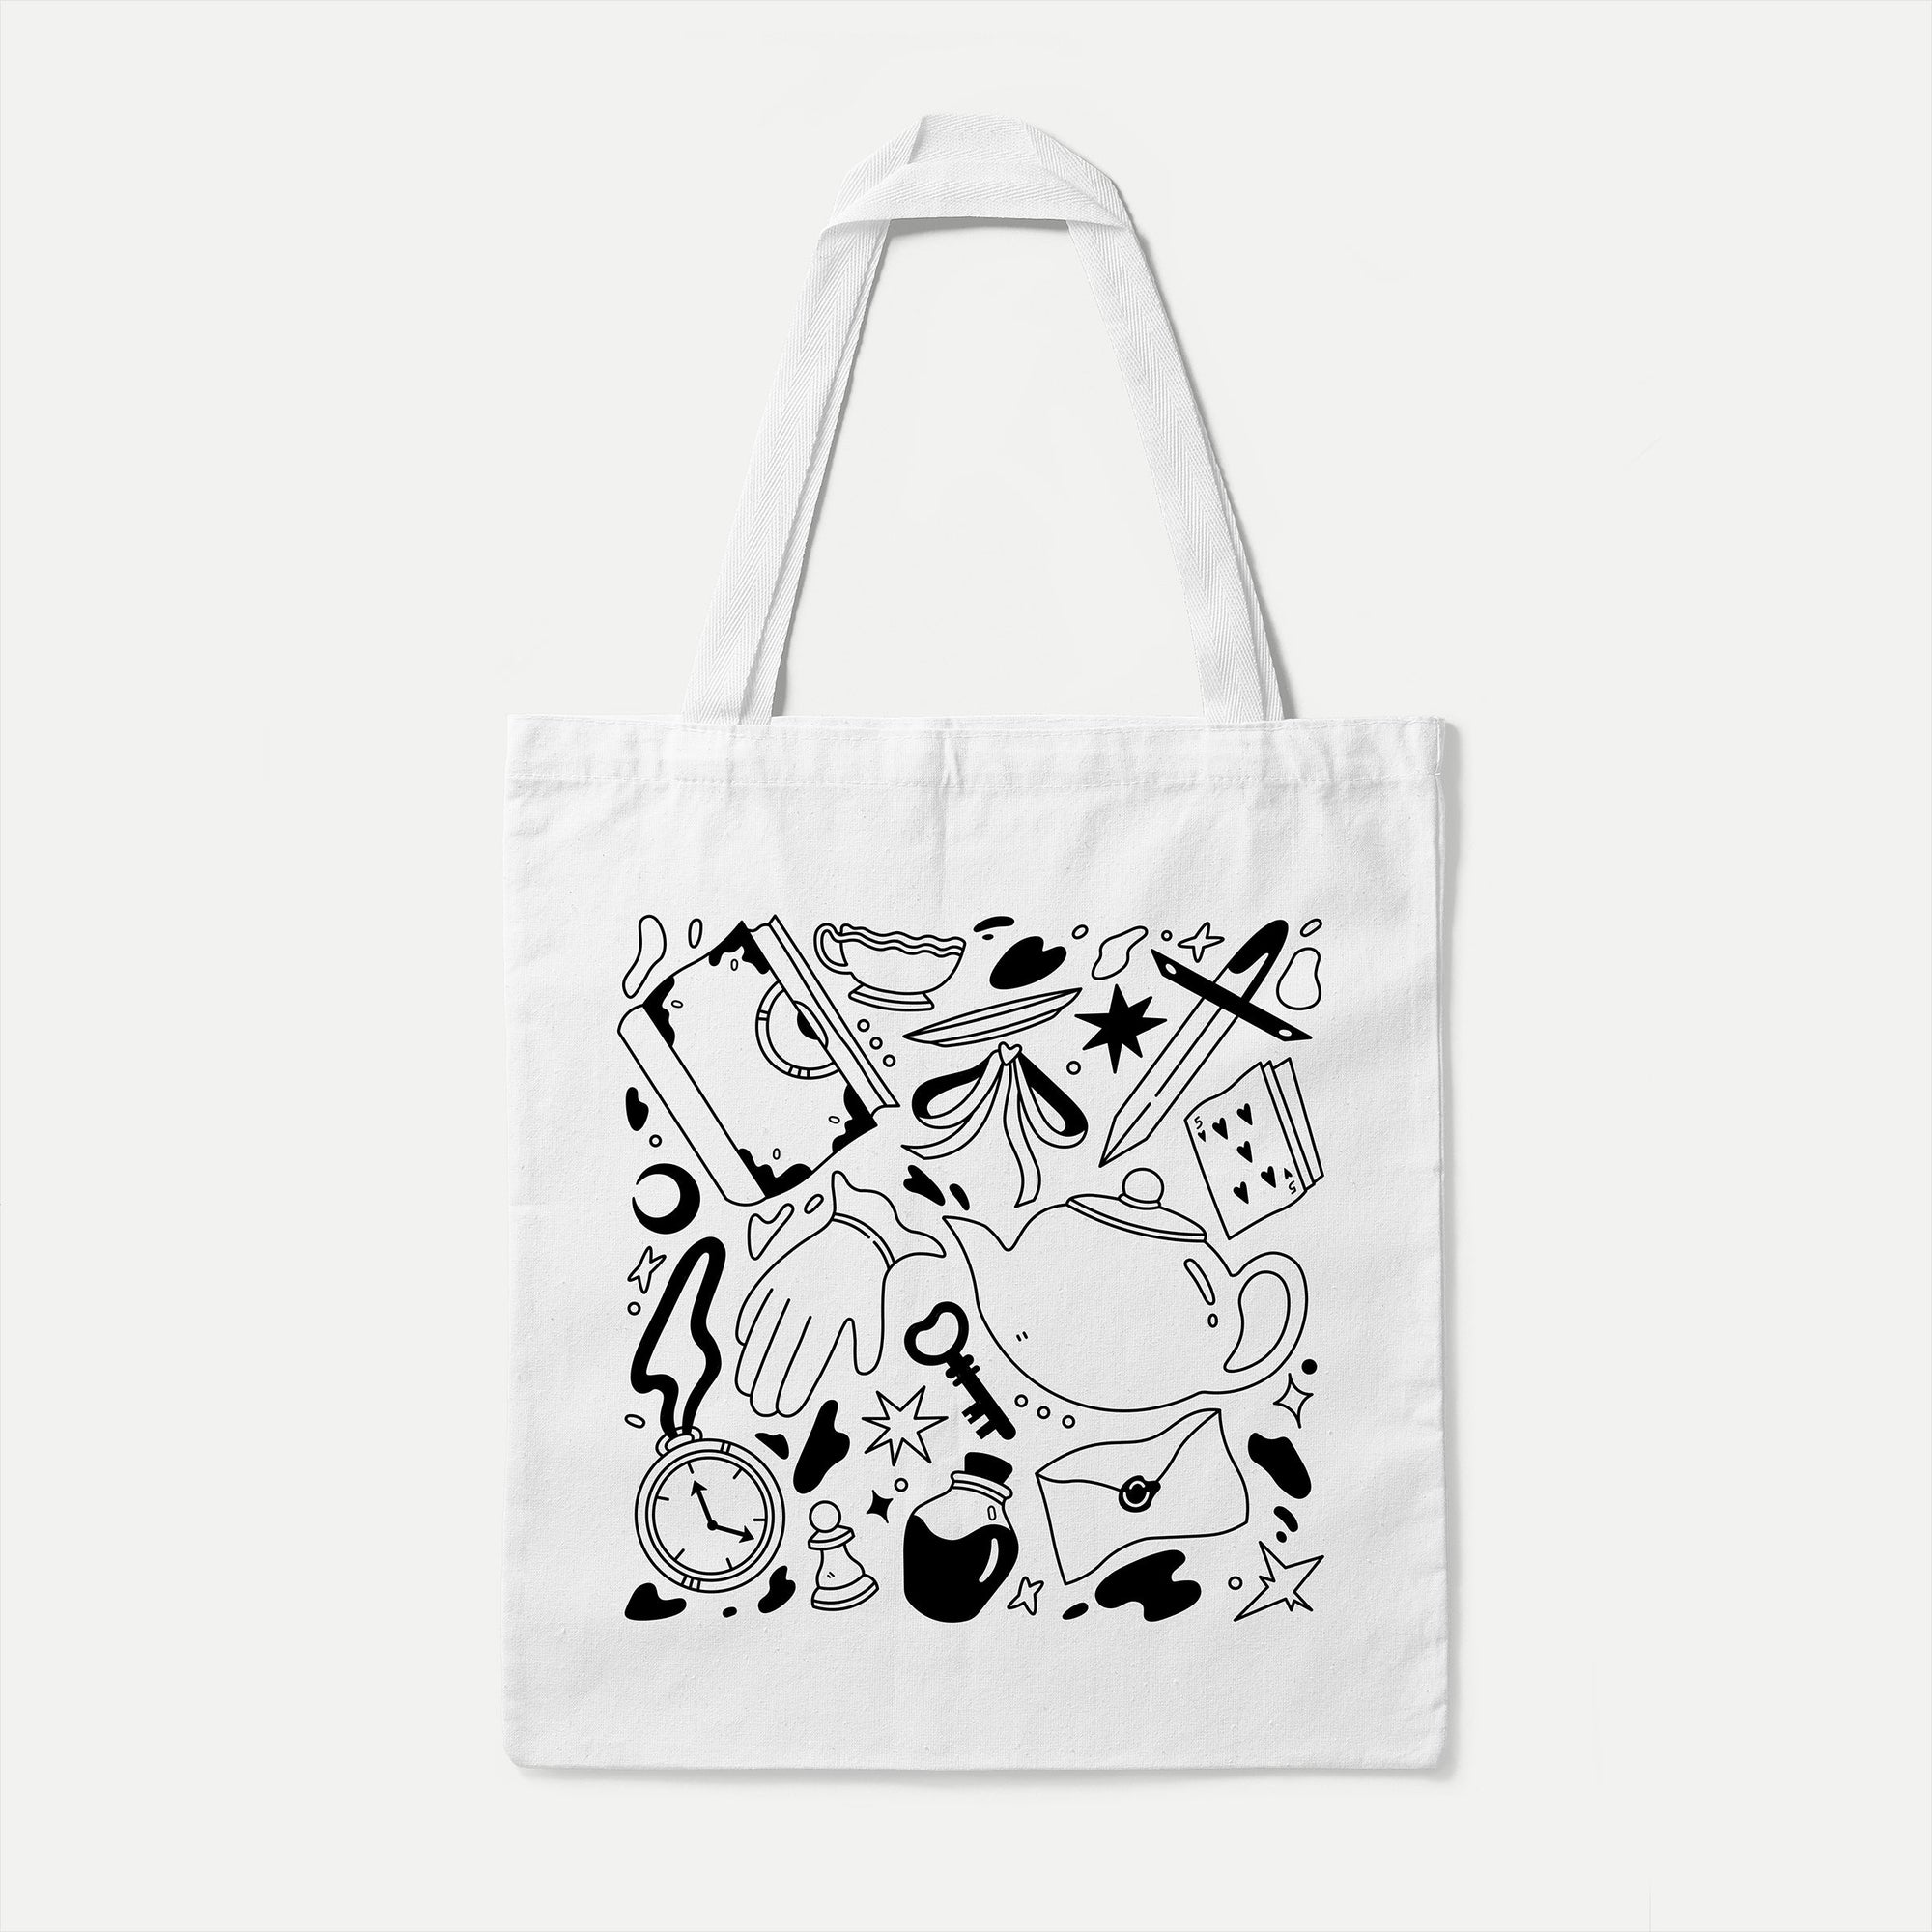 Historical Fiction Tote